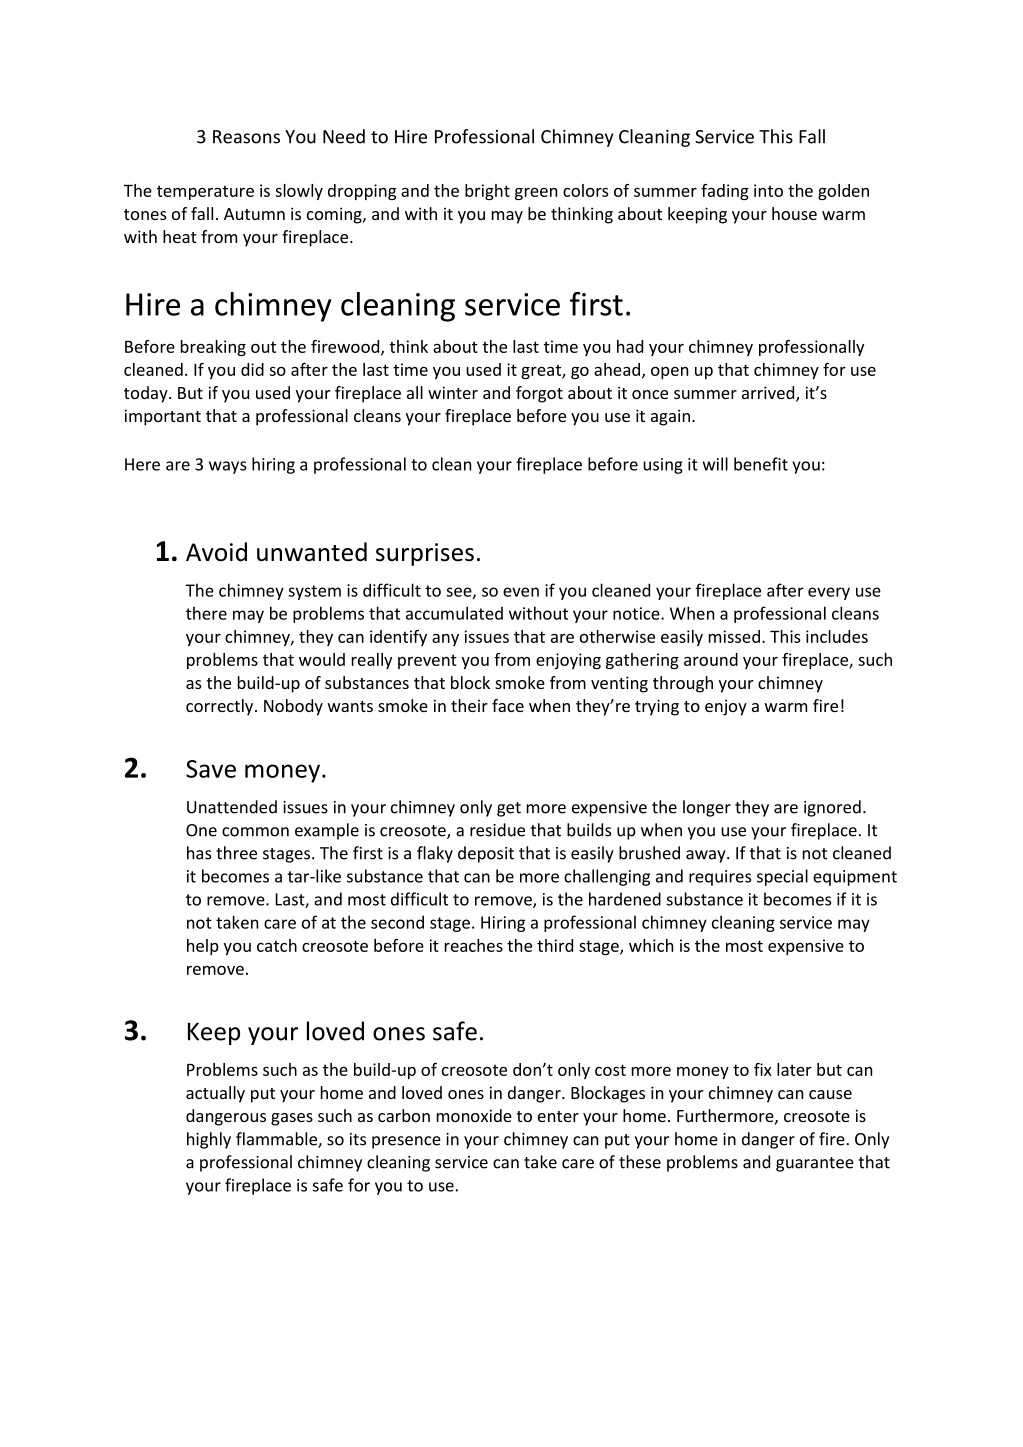 3 reasons you need to hire professional chimney